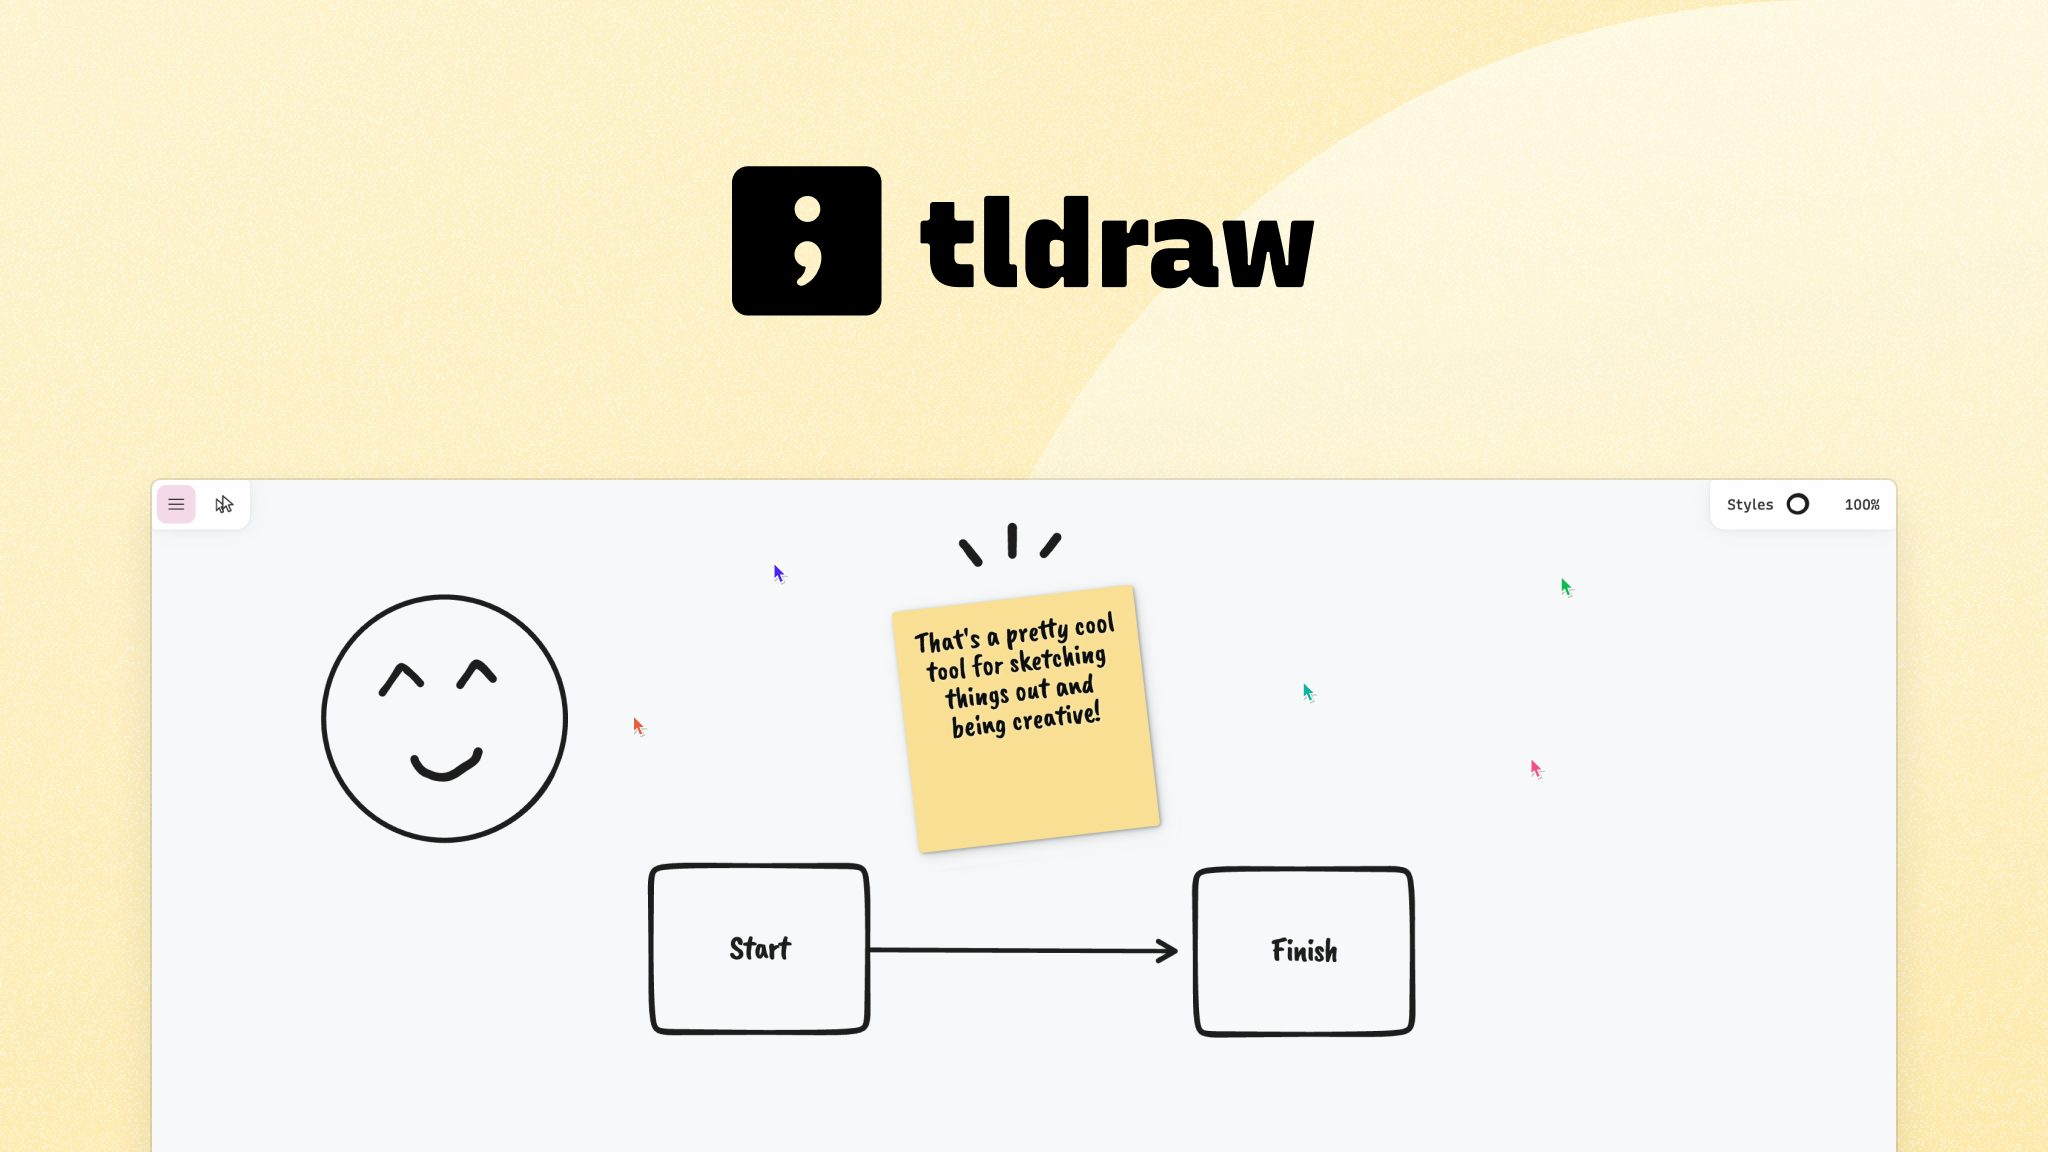 Tldraw became viral by converting its product to multiplayer with Liveblocks